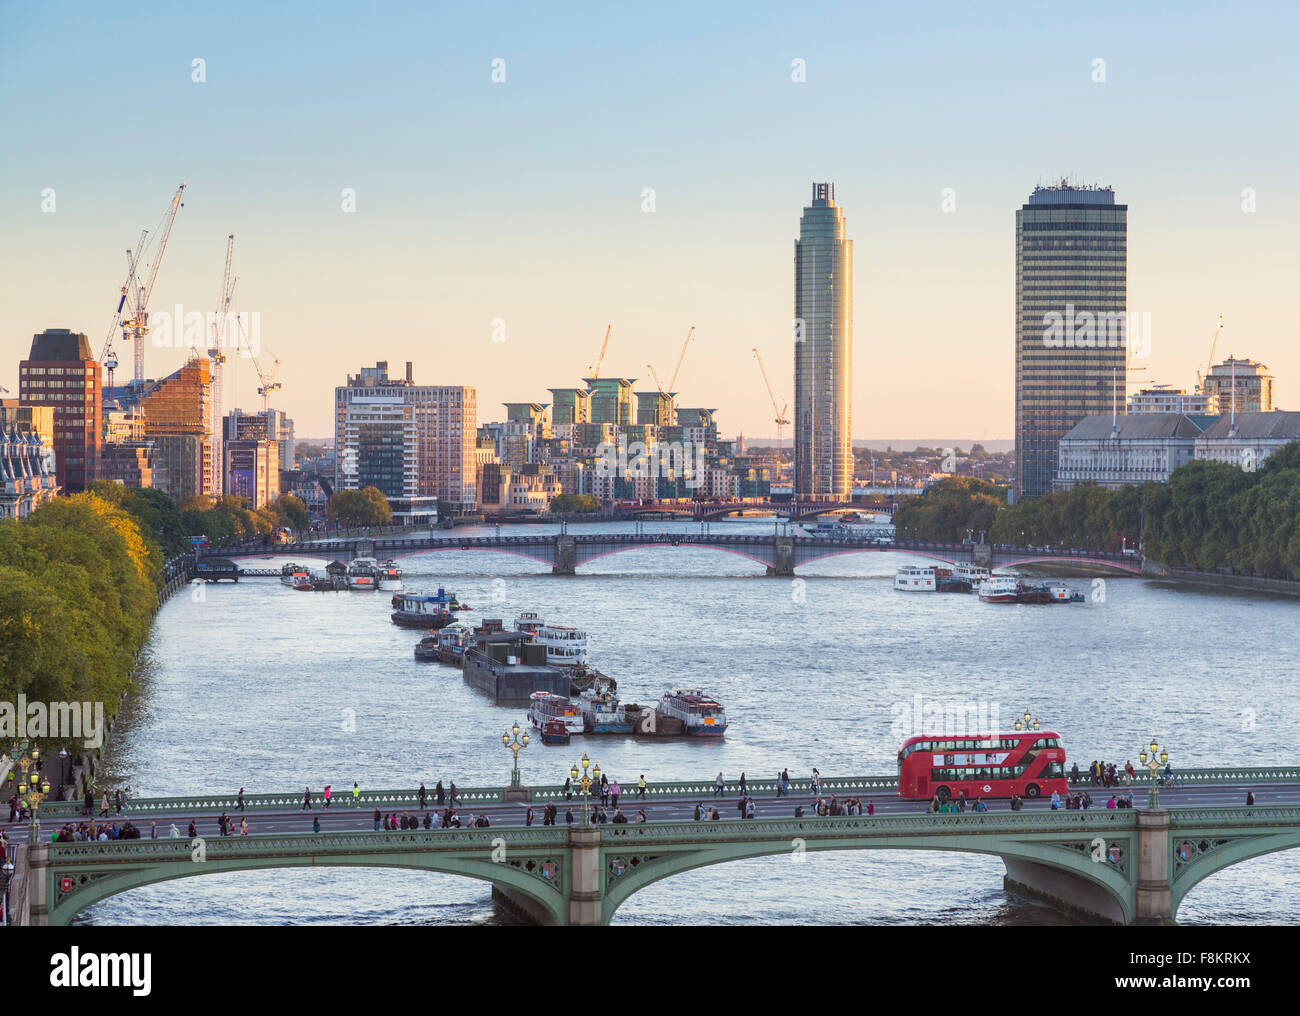 View of River Thames with Nine Elms redevelopment and St George Wharf on South Bank, London, England in late afternoon light Stock Photo